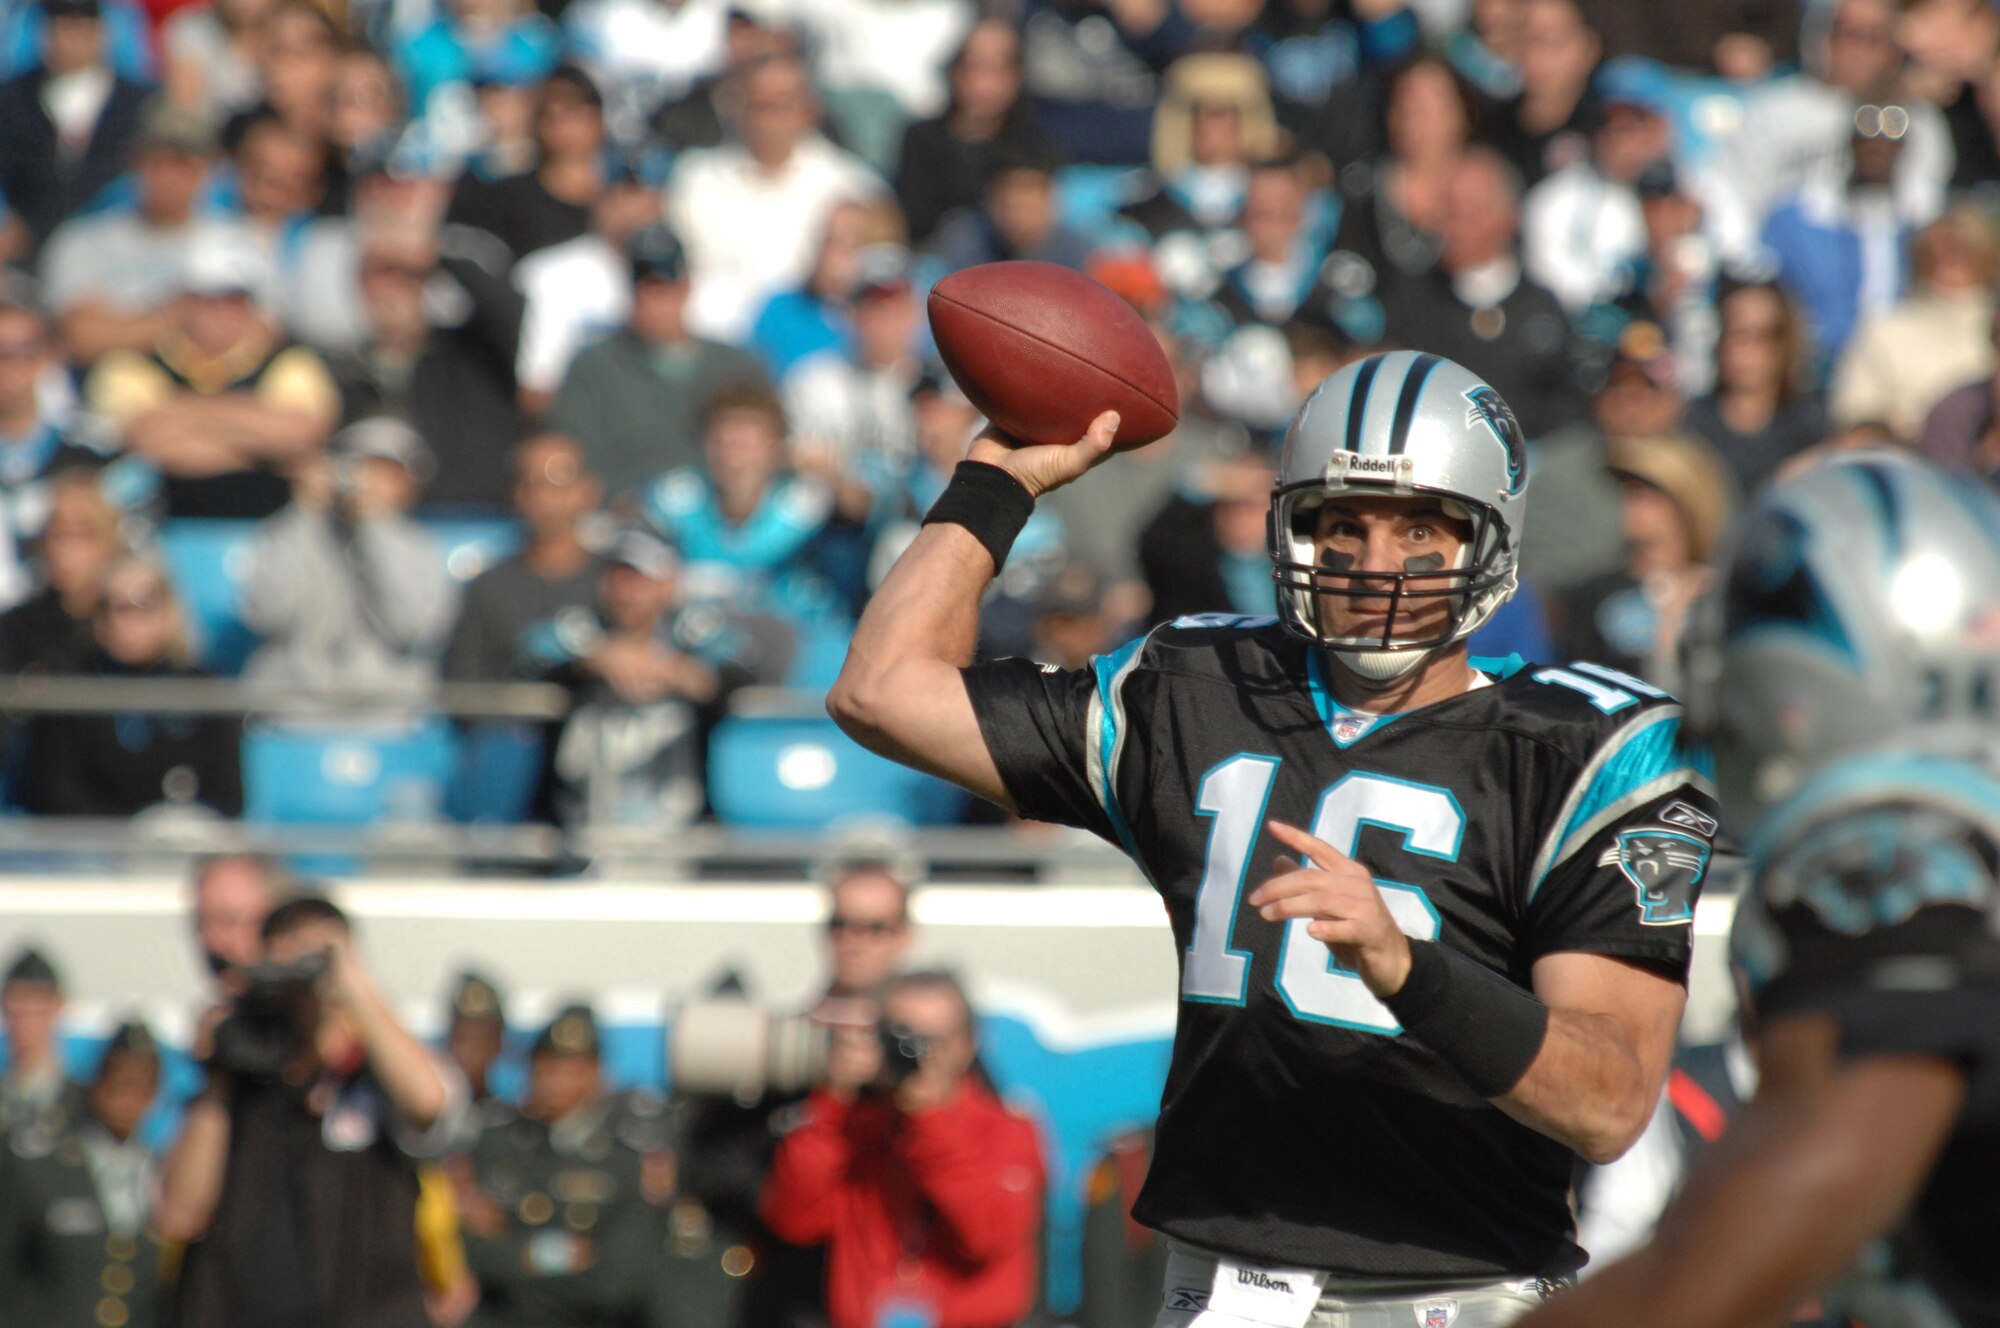 CHARLOTTE, N.C. -- Carolina Panthers quarterback, Vinny Testaverde, attempts a pass Nov. 11 against the Atlanta Falcons. Tesaverde took time after the game to reflect on what being led onto the field by wounded veterans meant to him.
"For me it's always special. Just knowing what they're doing for us ... giving us the privilege of going out and playing the game we love so much," Testaverde said. "Without the military, we wouldn't be able to do that. I'm very thankful for them."
(U.S. Air Force photo/Staff Sgt. Henry Hoegen)